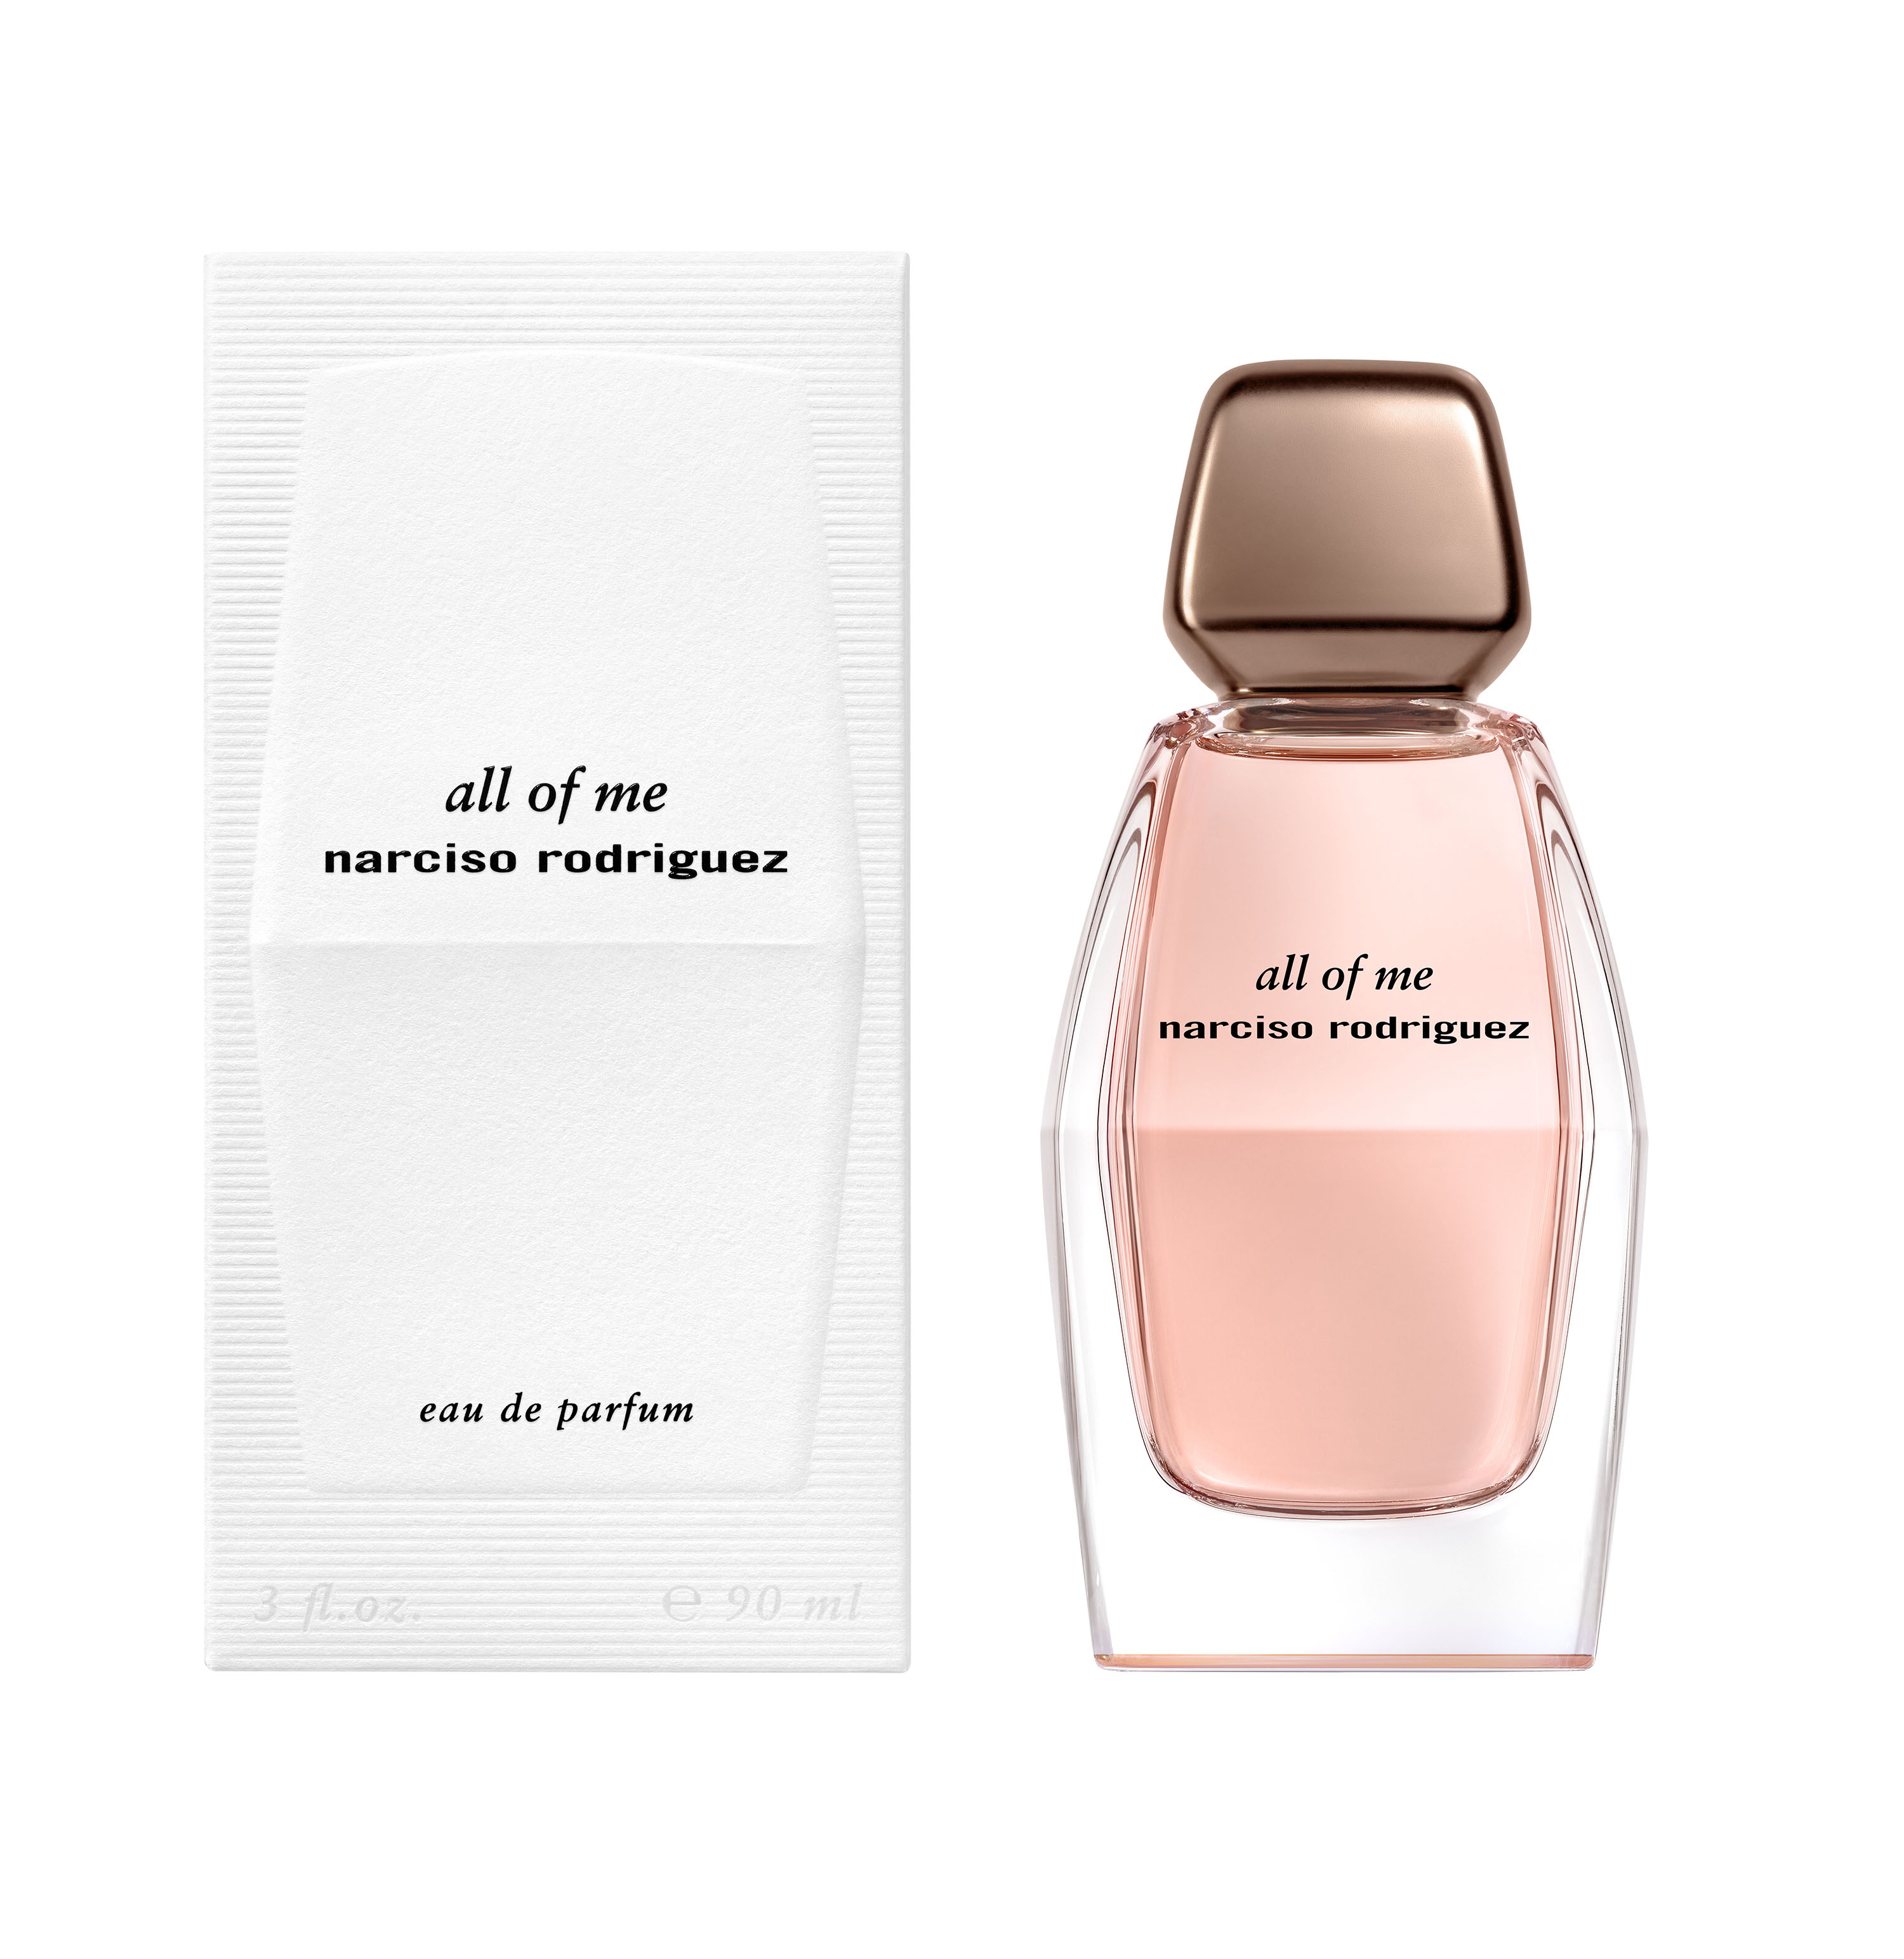 all of me narcissi Rodriguez